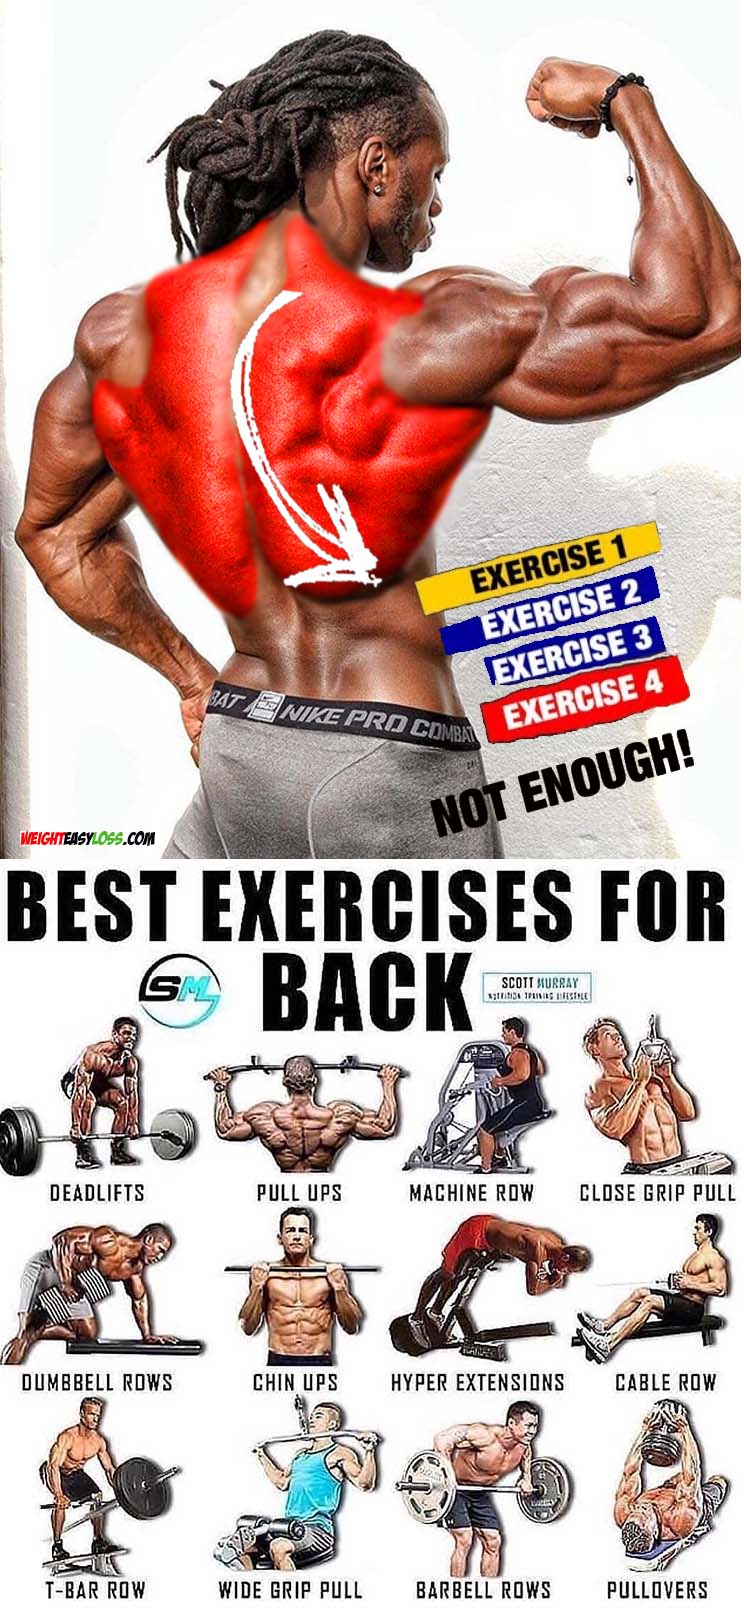 Exercises for Back